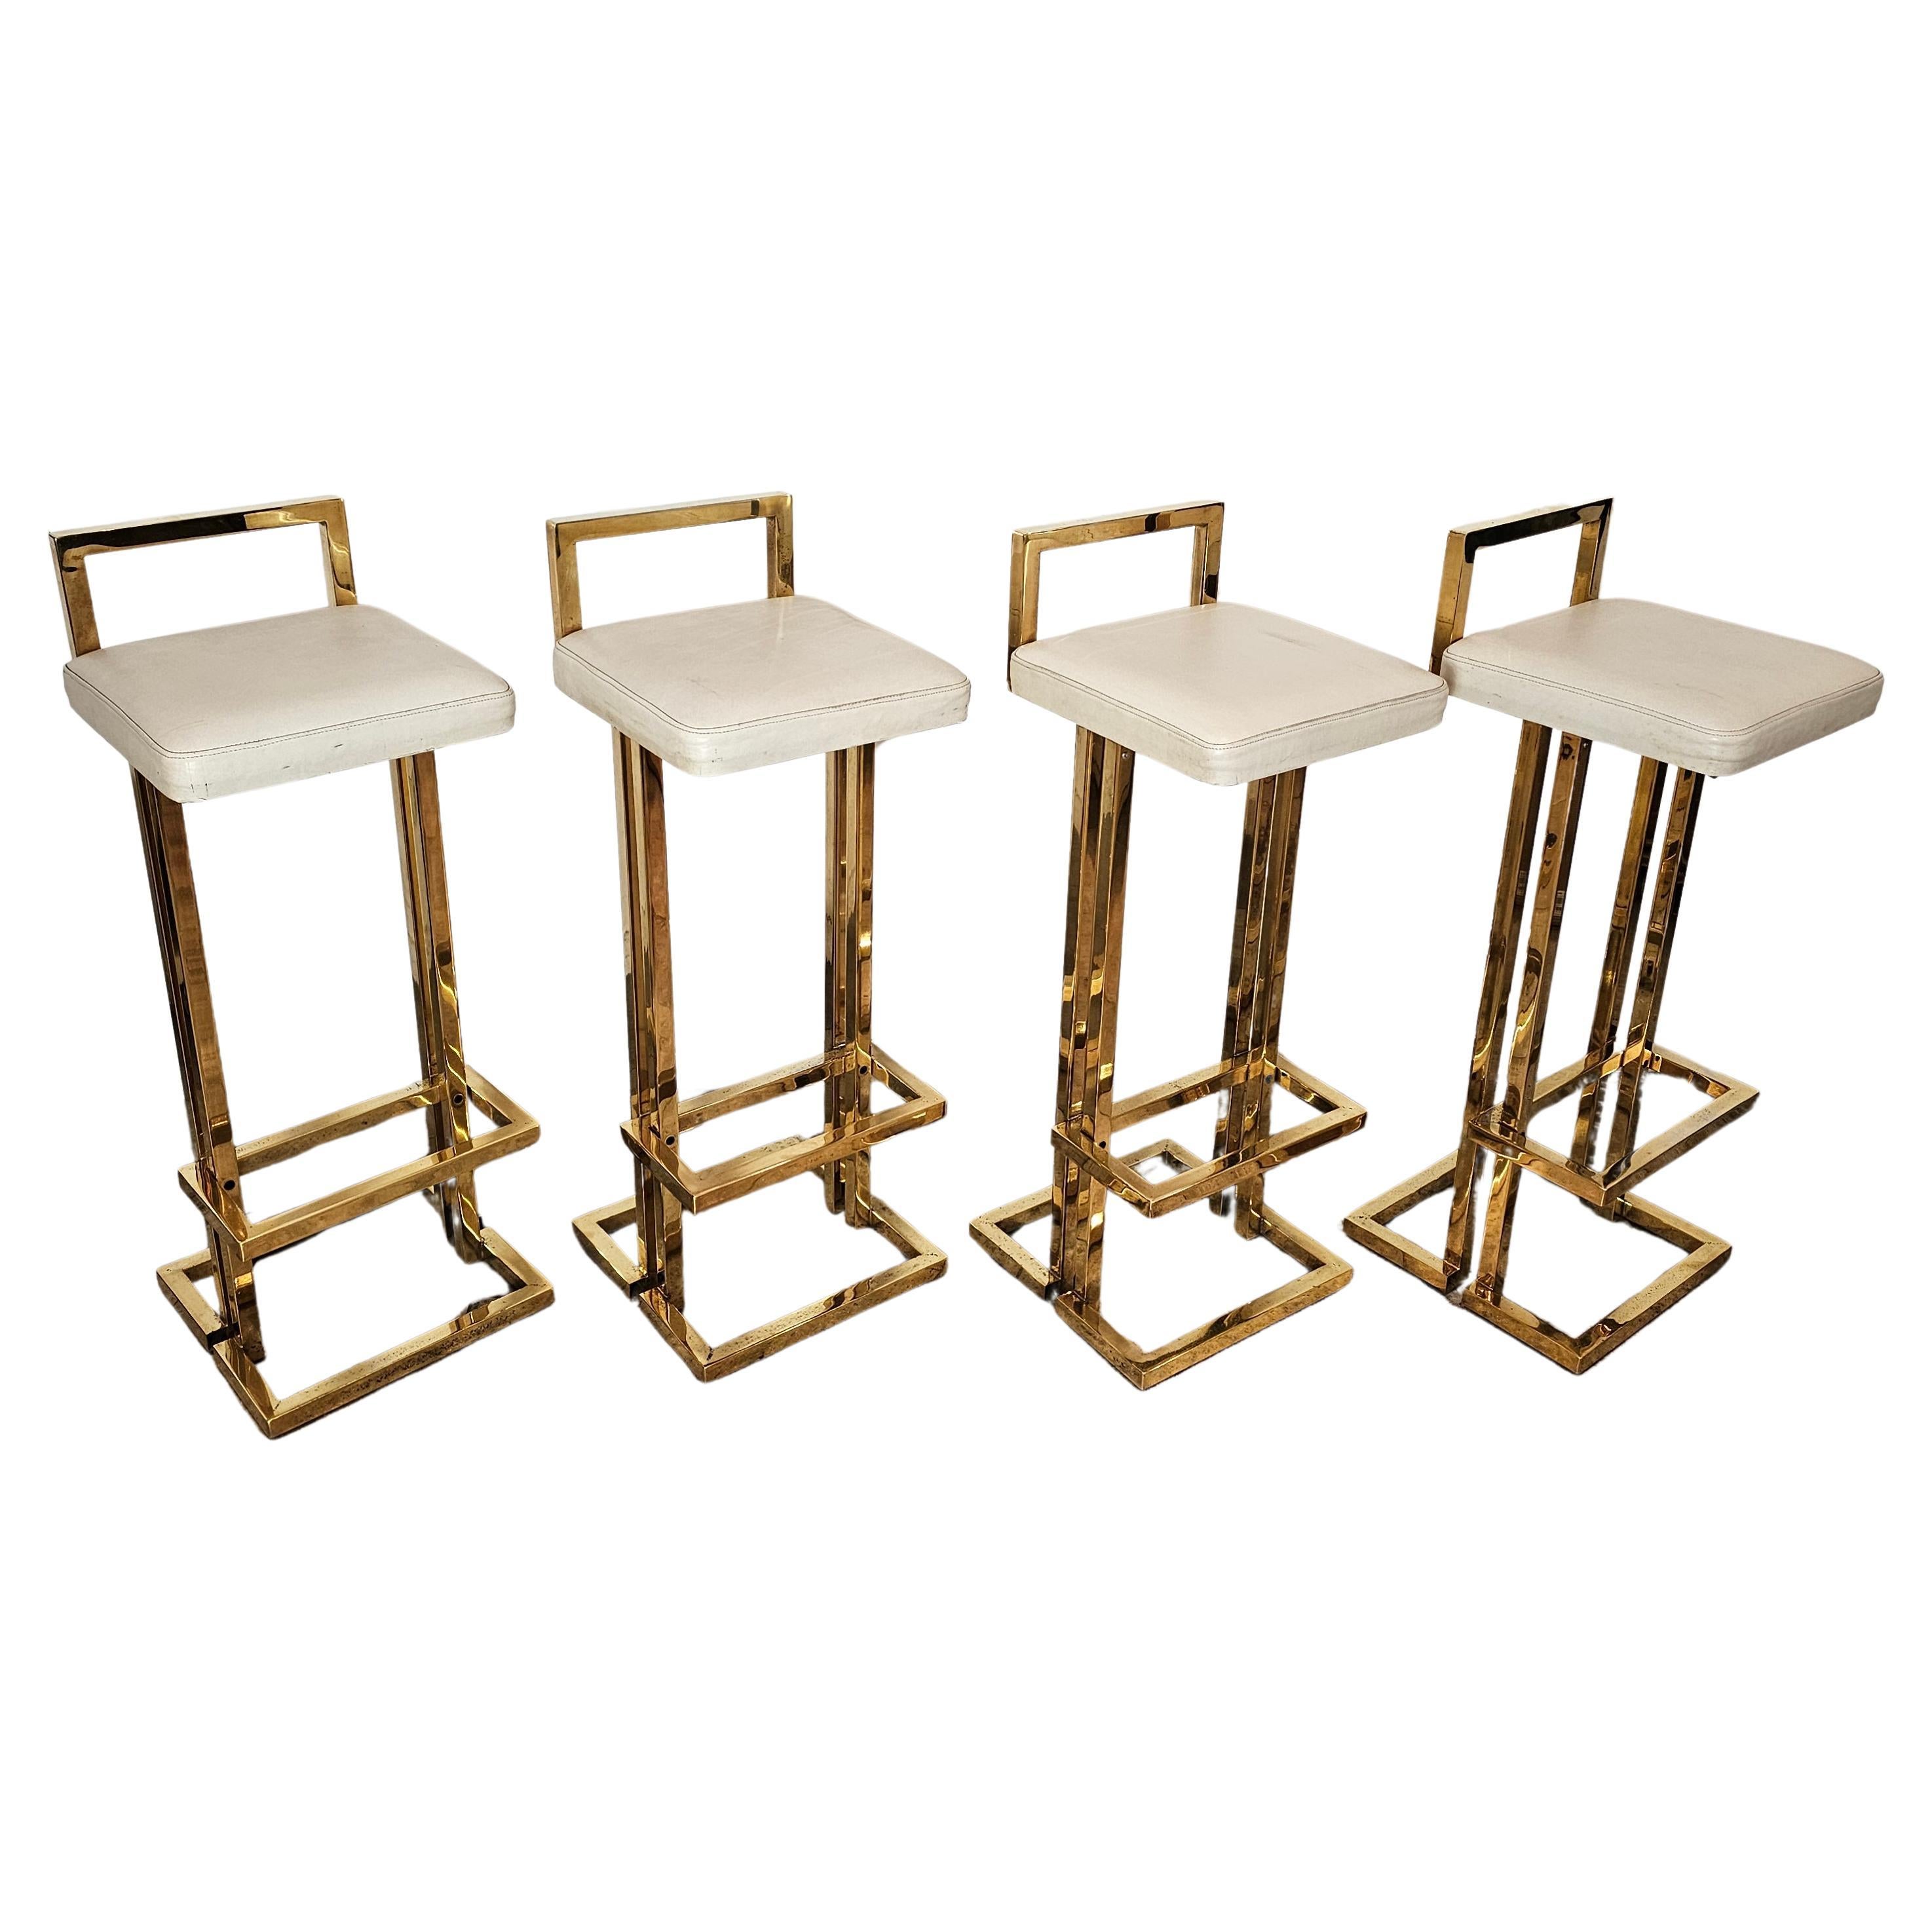 Set of 4 Bar Stools in the Style of "Maison Jansen" For Sale